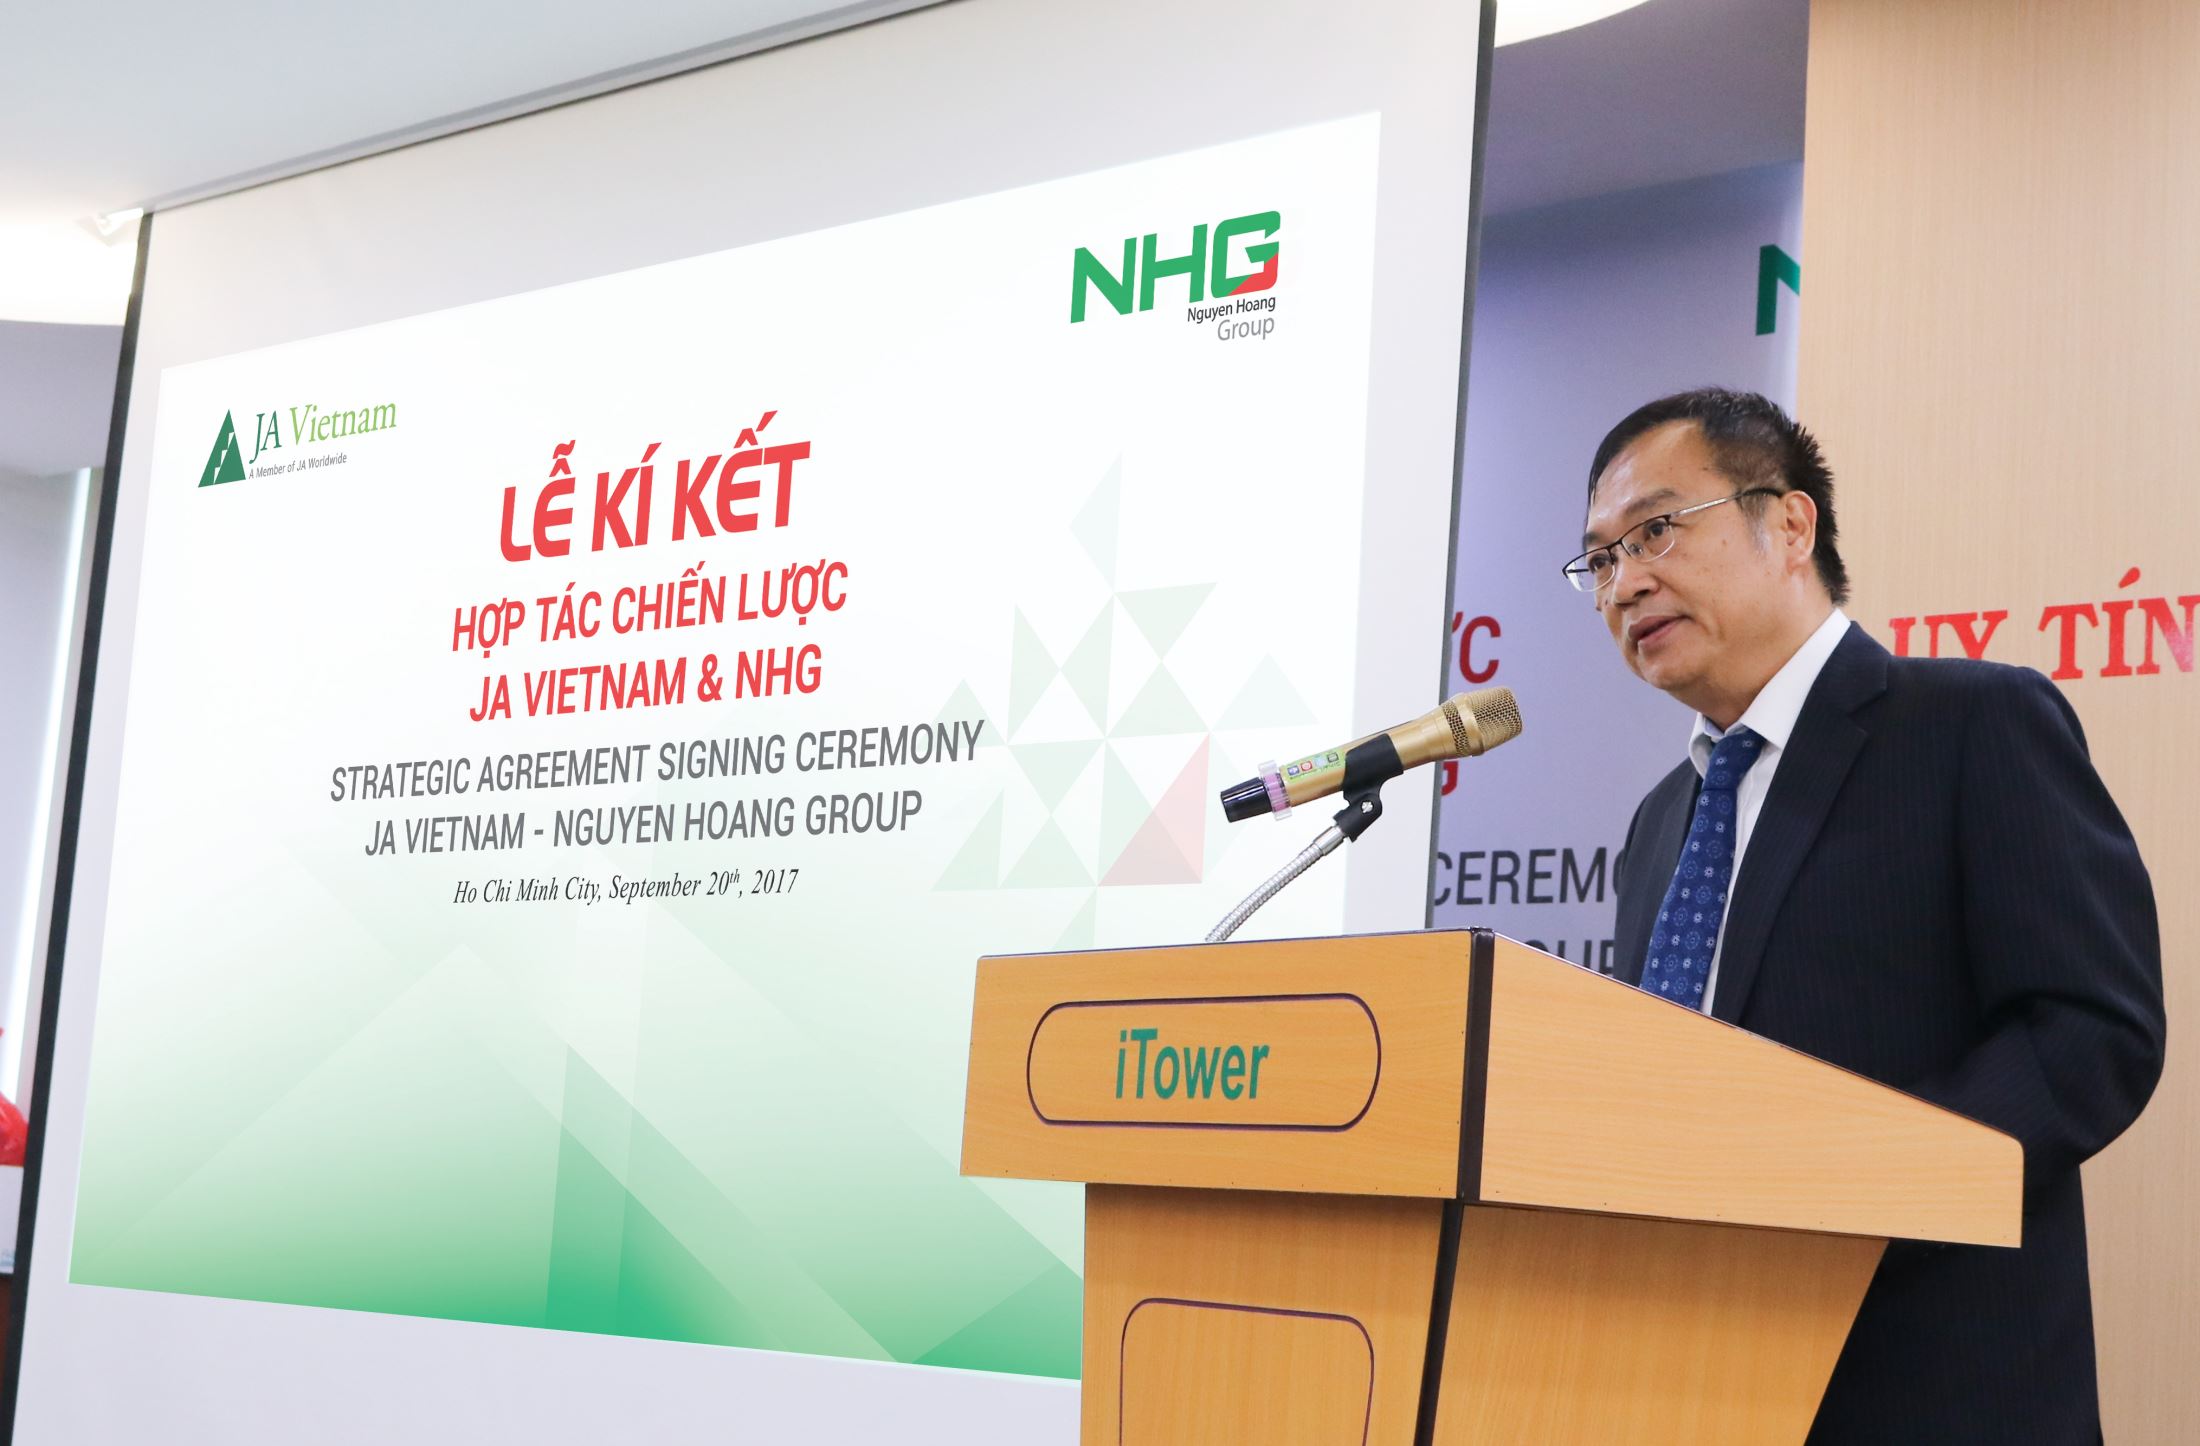 "I believe this agreement will start for the long and strong collaboration between NHG and JA Vietnam, together to create good values for young generations in NHG's education system and all over Vietnam", said Dr. Dinh Quang Nuong, Deputy CEO of NHG at the event